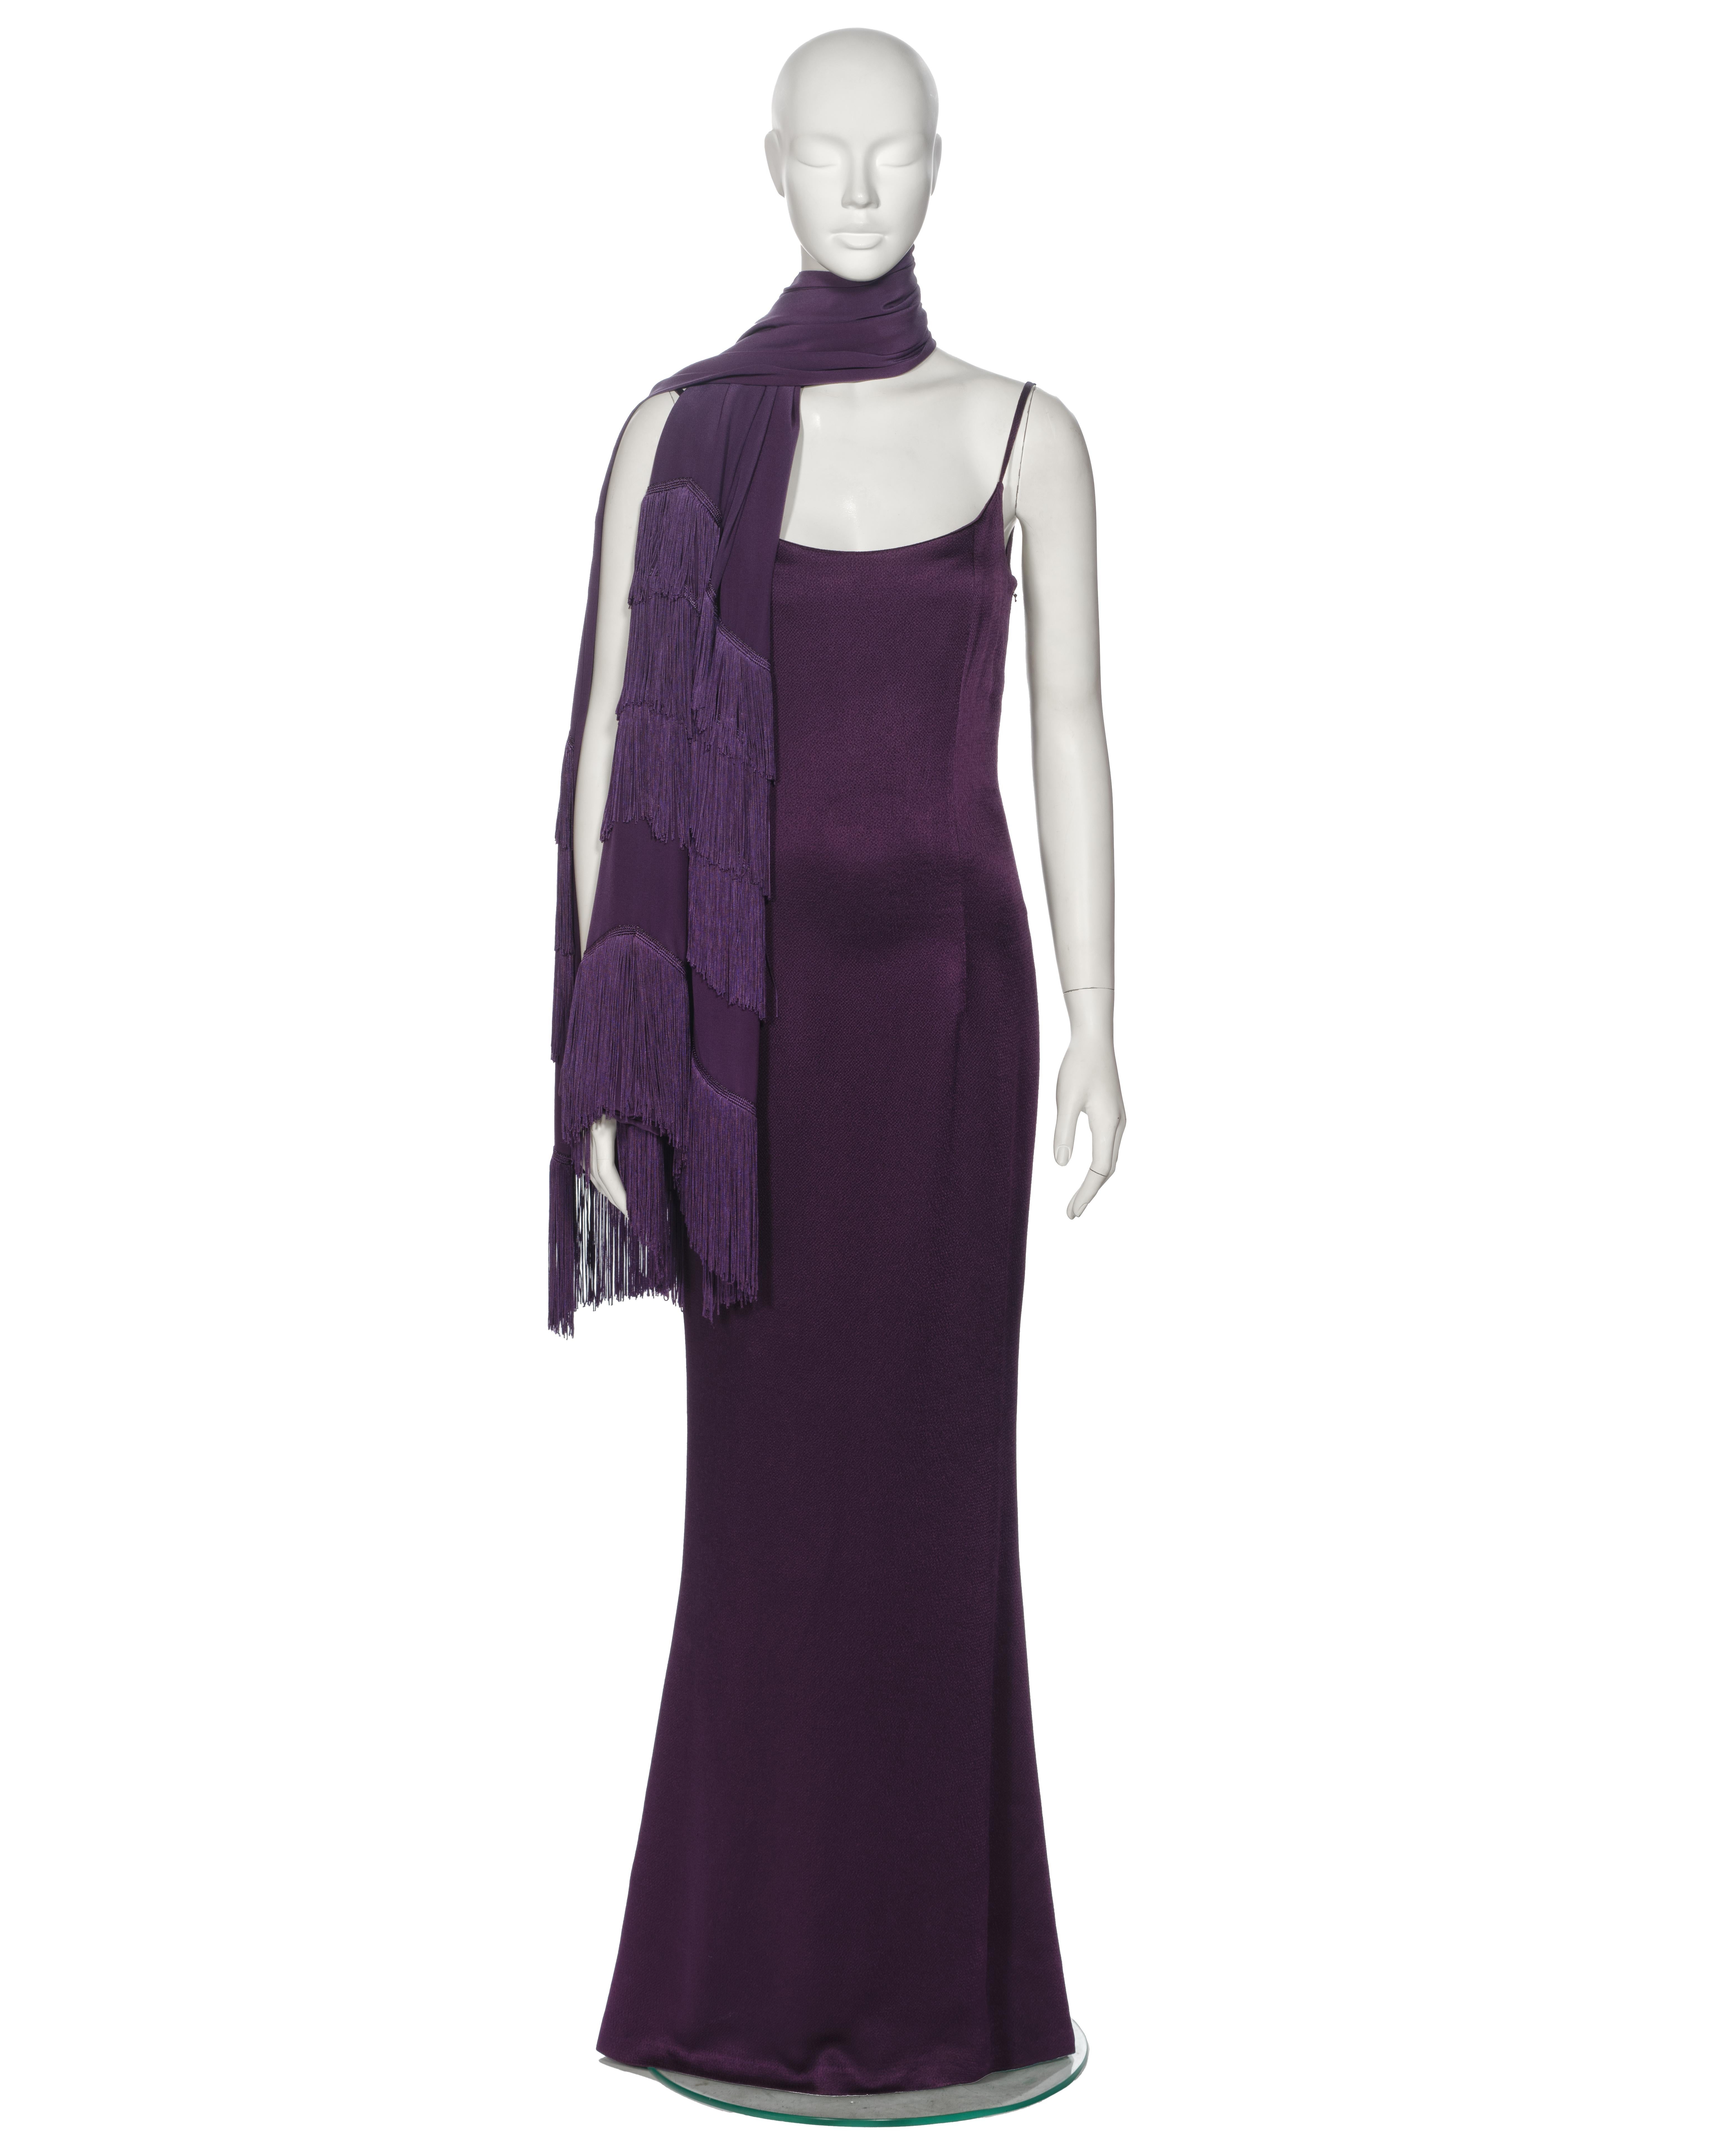 ▪ Christian Dior Evening Dress and Shawl Ensemble 
▪ Creative Director: John Galliano
▪ Spring-Summer 1998
▪ Constructed from a deep purple hammered satin 
▪ Scoop neckline design 
▪ Spaghetti straps 
▪ Flared skirt cascading to floor length
▪ Lined